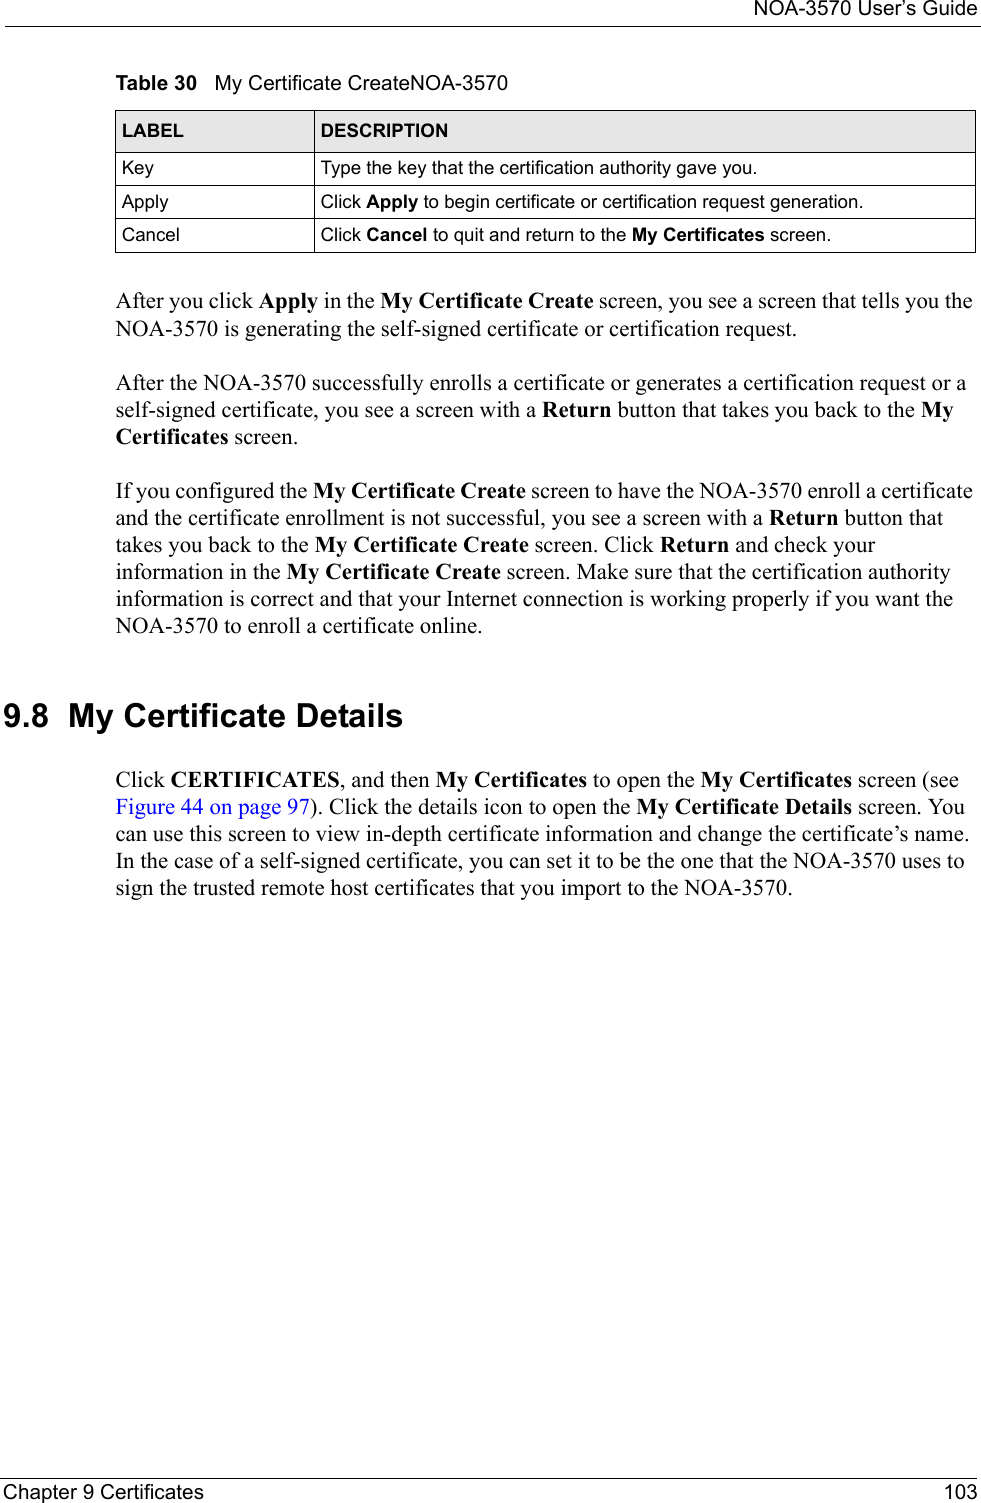 NOA-3570 User’s GuideChapter 9 Certificates 103After you click Apply in the My Certificate Create screen, you see a screen that tells you the NOA-3570 is generating the self-signed certificate or certification request. After the NOA-3570 successfully enrolls a certificate or generates a certification request or a self-signed certificate, you see a screen with a Return button that takes you back to the My Certificates screen.If you configured the My Certificate Create screen to have the NOA-3570 enroll a certificate and the certificate enrollment is not successful, you see a screen with a Return button that takes you back to the My Certificate Create screen. Click Return and check your information in the My Certificate Create screen. Make sure that the certification authority information is correct and that your Internet connection is working properly if you want the NOA-3570 to enroll a certificate online.9.8  My Certificate DetailsClick CERTIFICATES, and then My Certificates to open the My Certificates screen (see Figure 44 on page 97). Click the details icon to open the My Certificate Details screen. You can use this screen to view in-depth certificate information and change the certificate’s name. In the case of a self-signed certificate, you can set it to be the one that the NOA-3570 uses to sign the trusted remote host certificates that you import to the NOA-3570. Key Type the key that the certification authority gave you.Apply Click Apply to begin certificate or certification request generation.Cancel Click Cancel to quit and return to the My Certificates screen.Table 30   My Certificate CreateNOA-3570LABEL DESCRIPTION